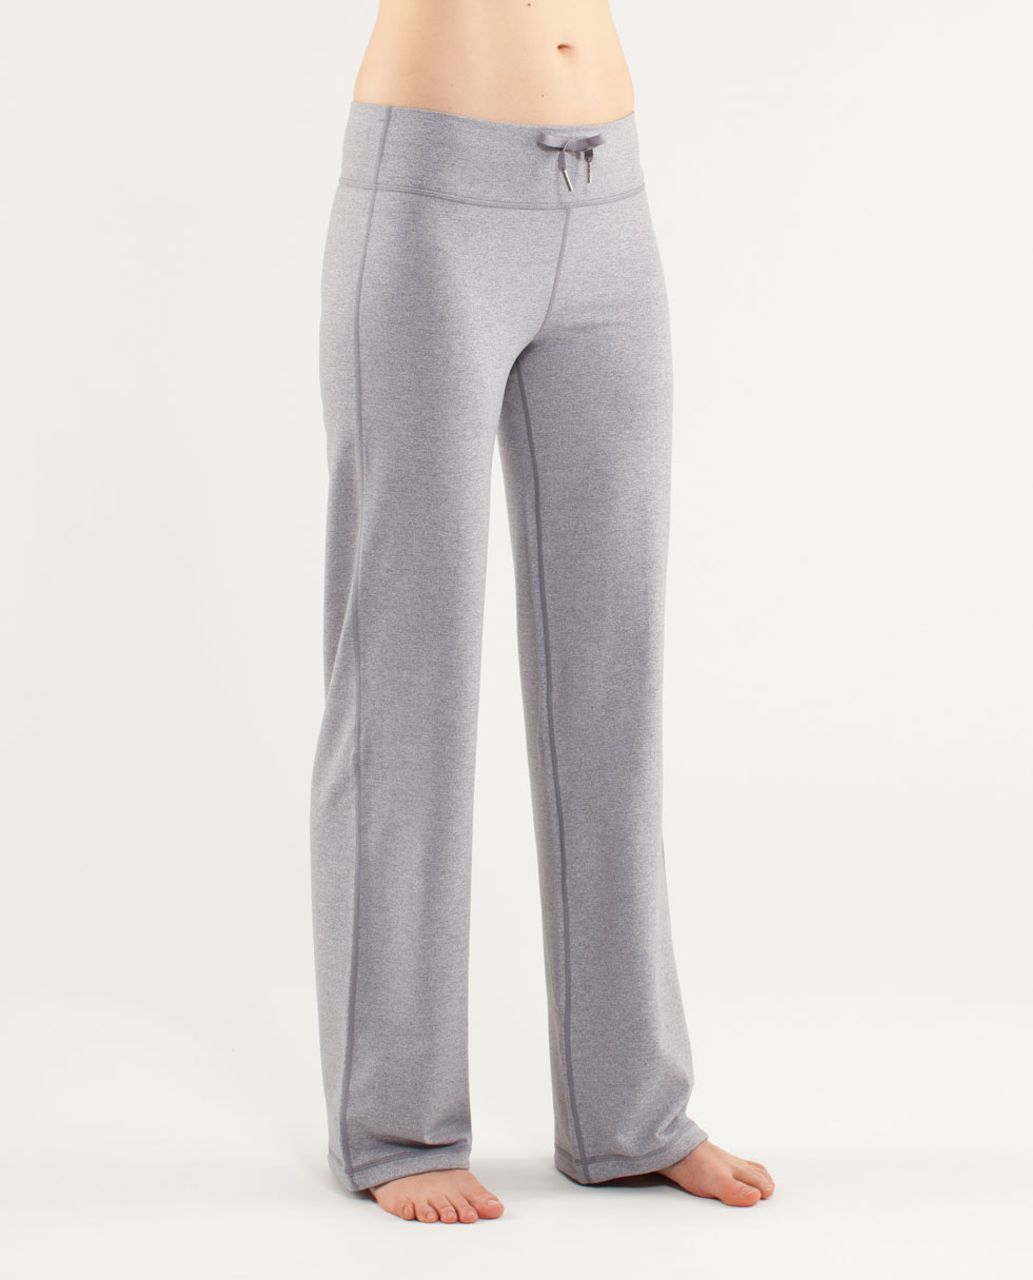 Lululemon Relaxed Fit Pant - Heathered Fossil